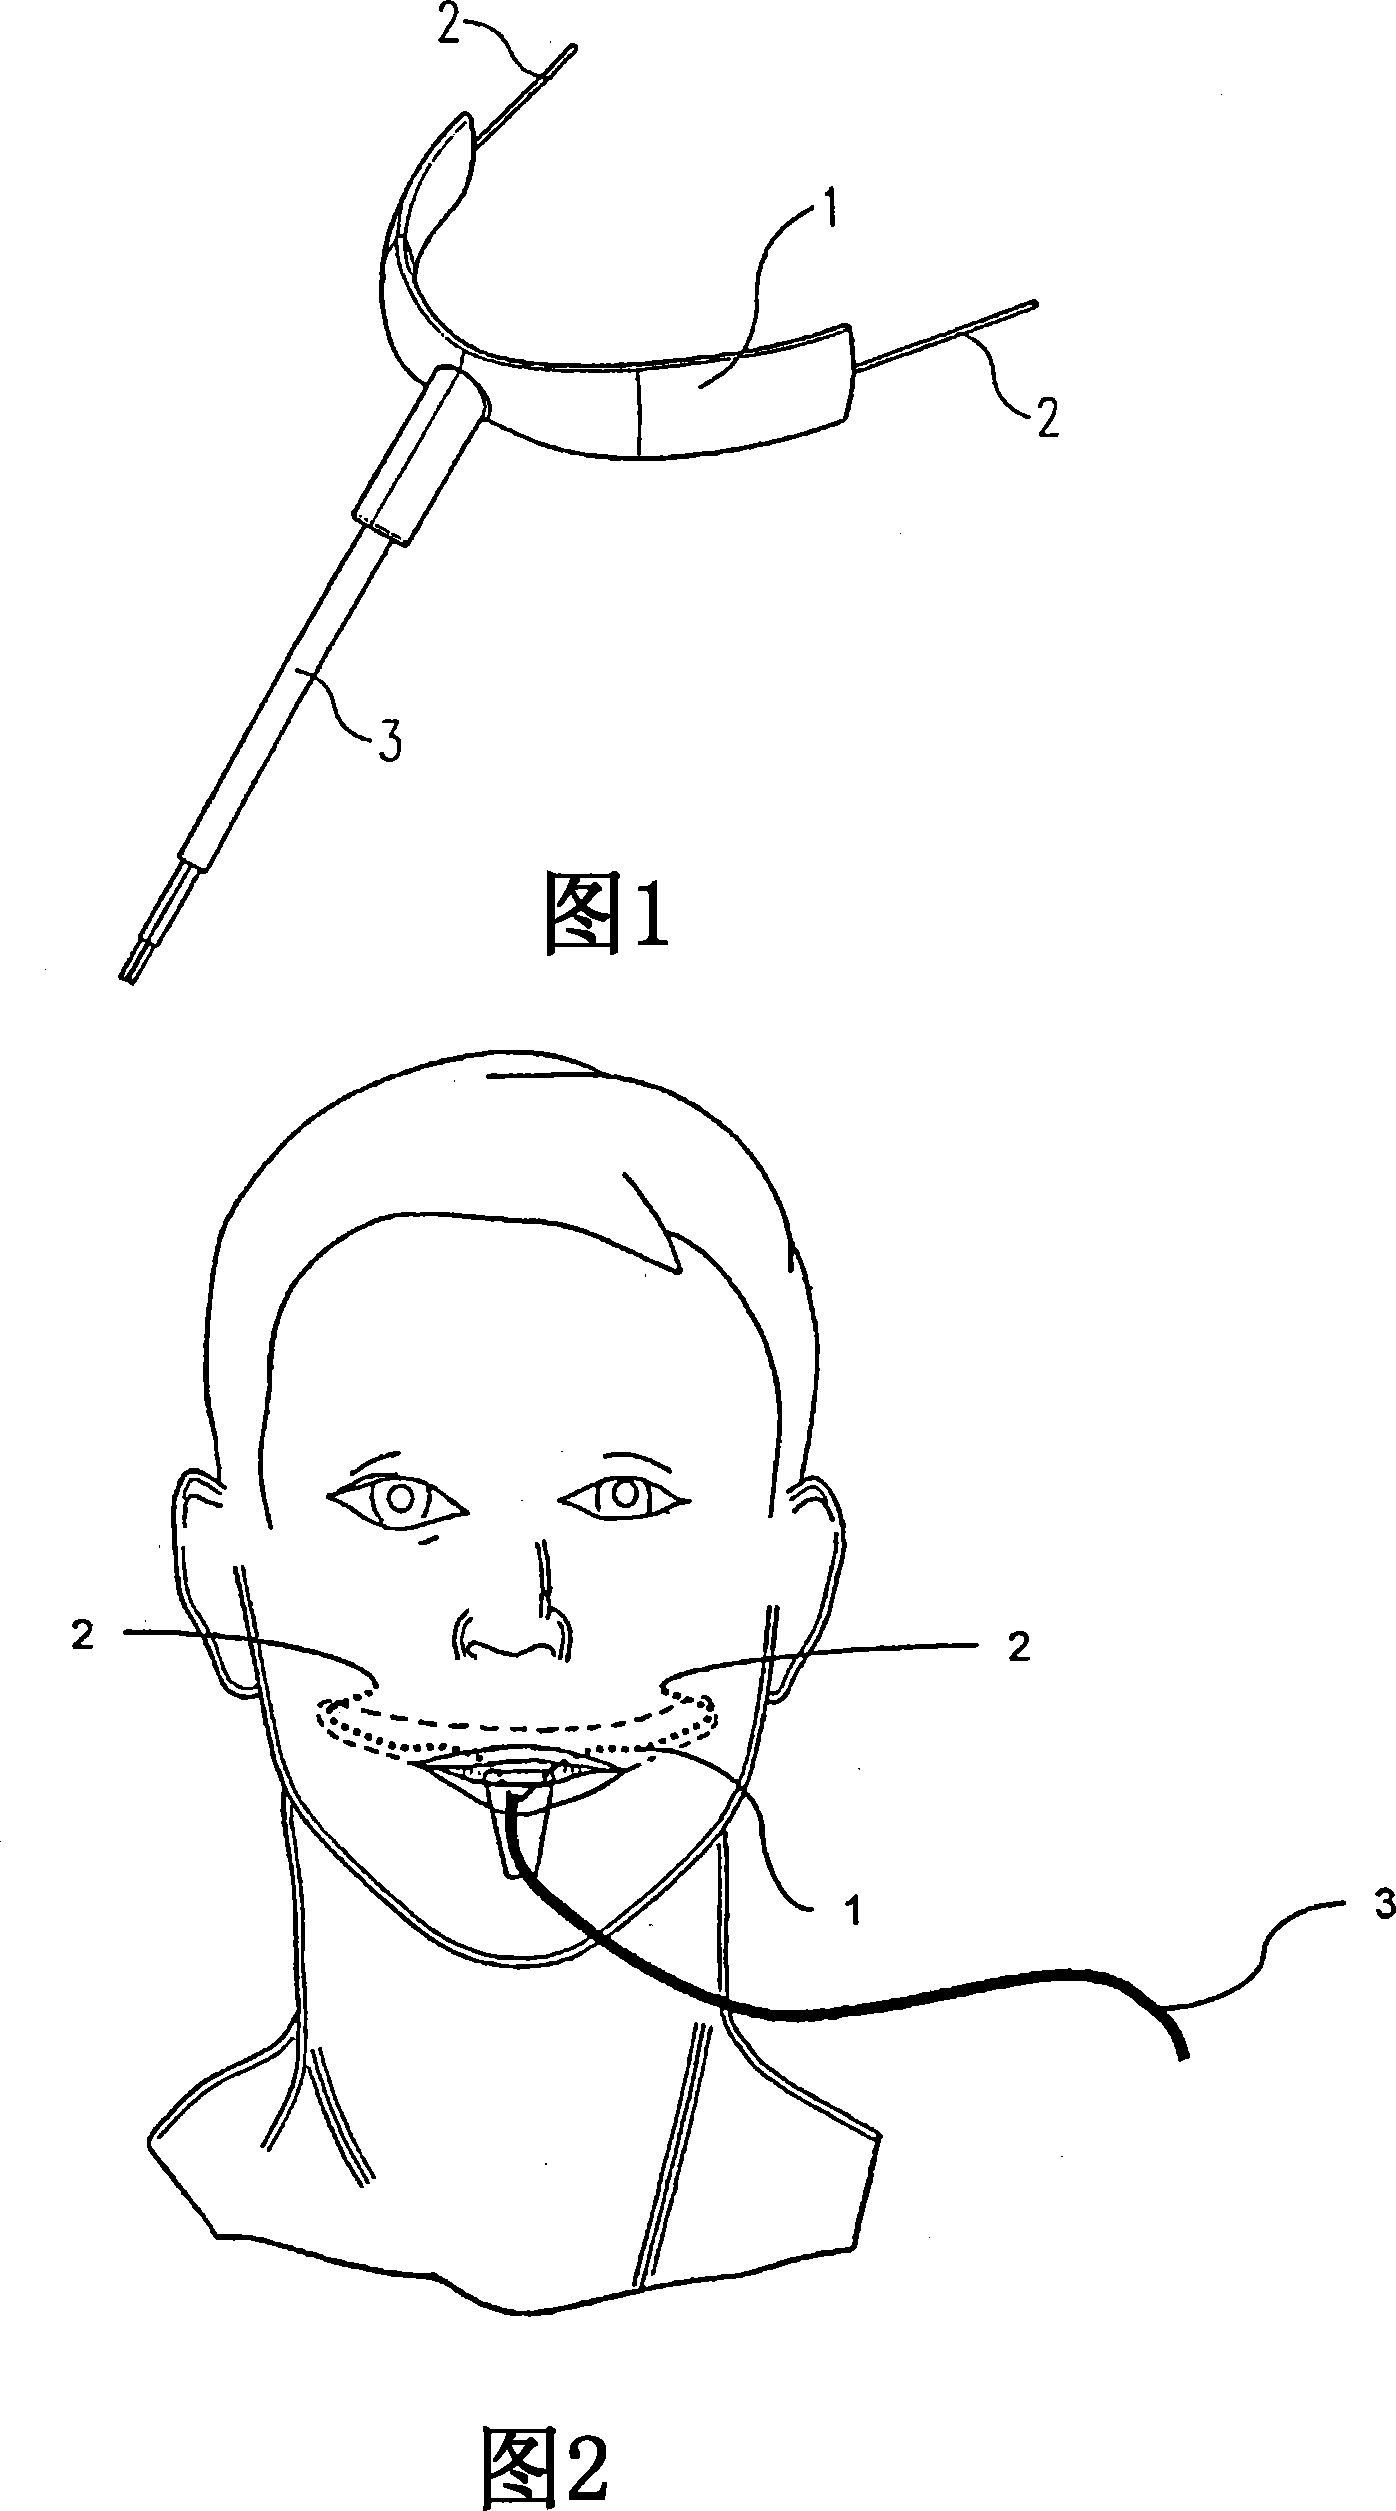 Device for preventing bruxism